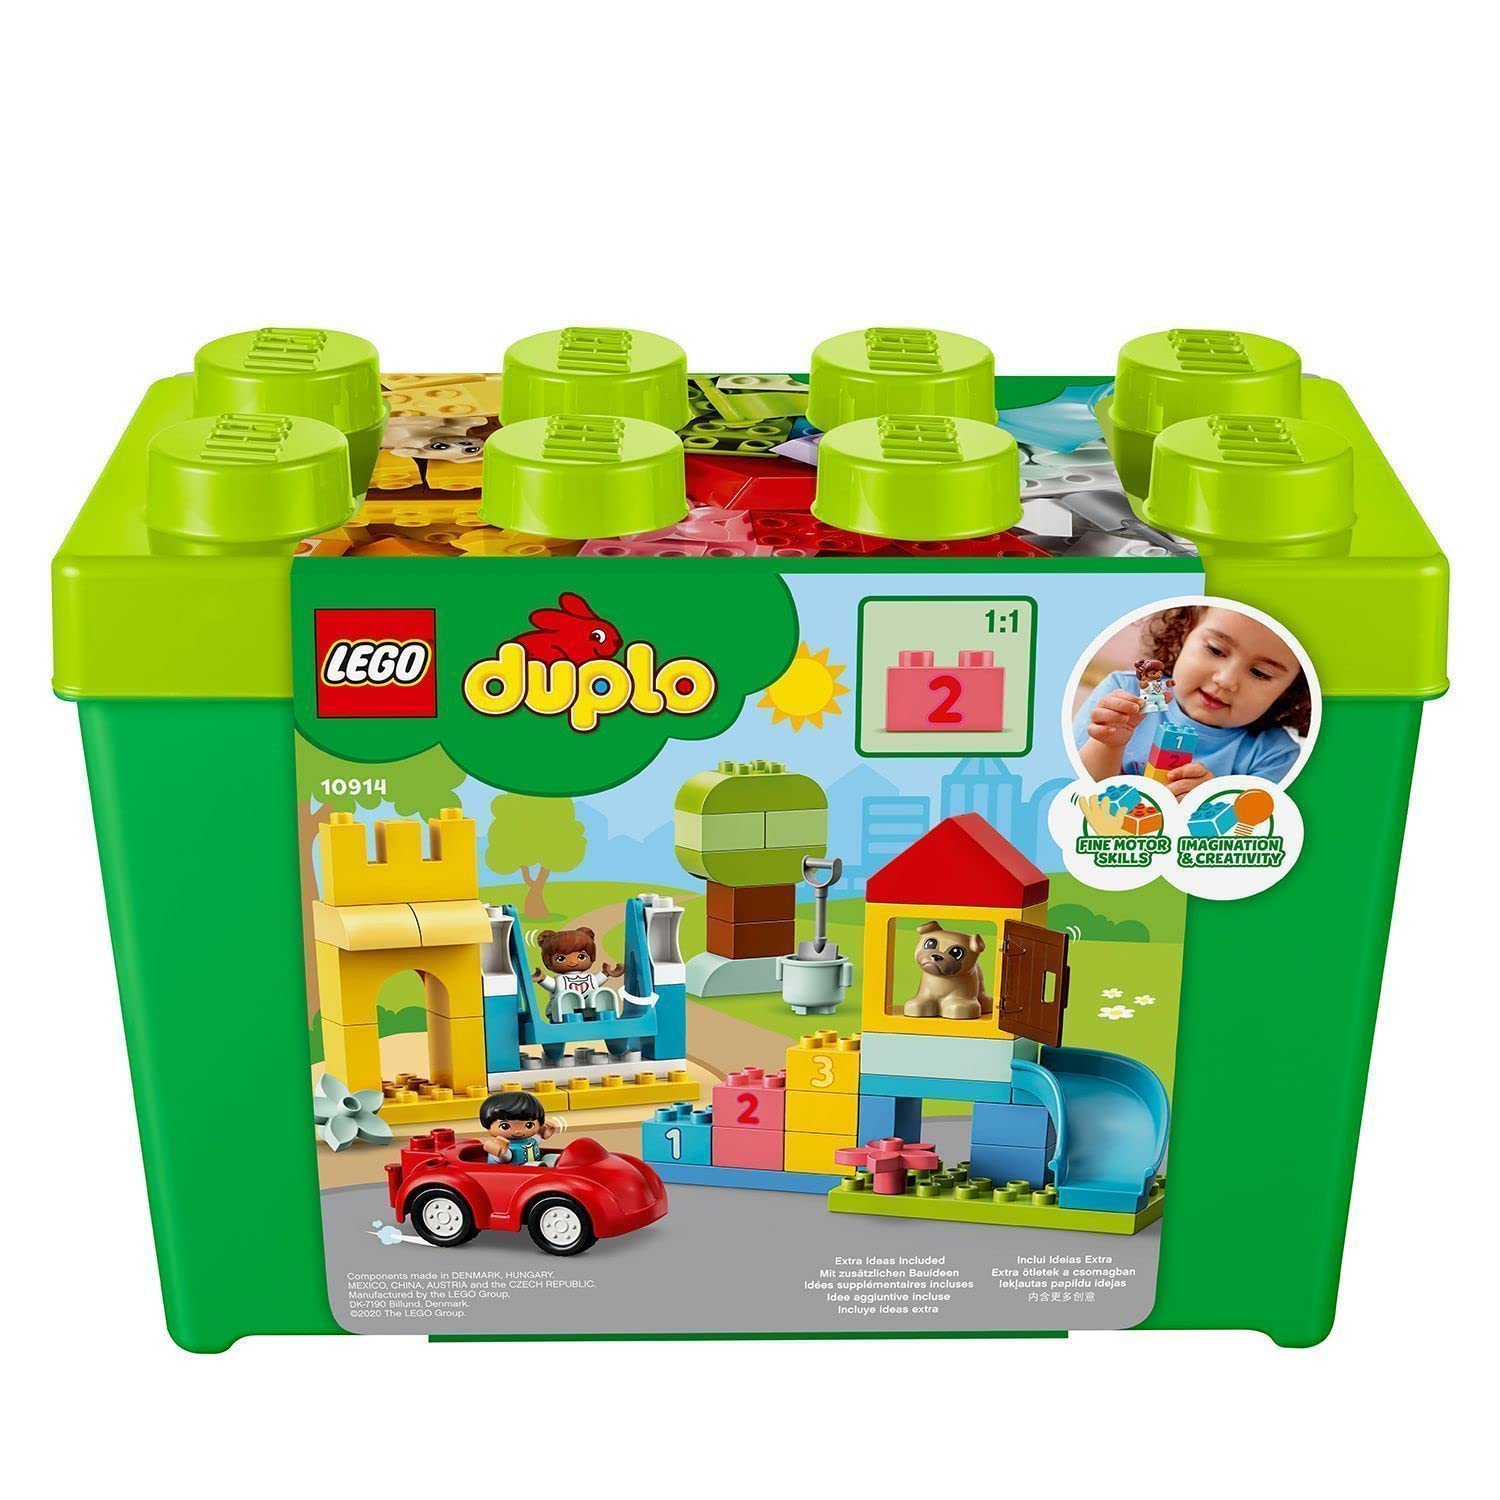 LEGO Duplo Deluxe Brick Box Building Kit For Ages 2+